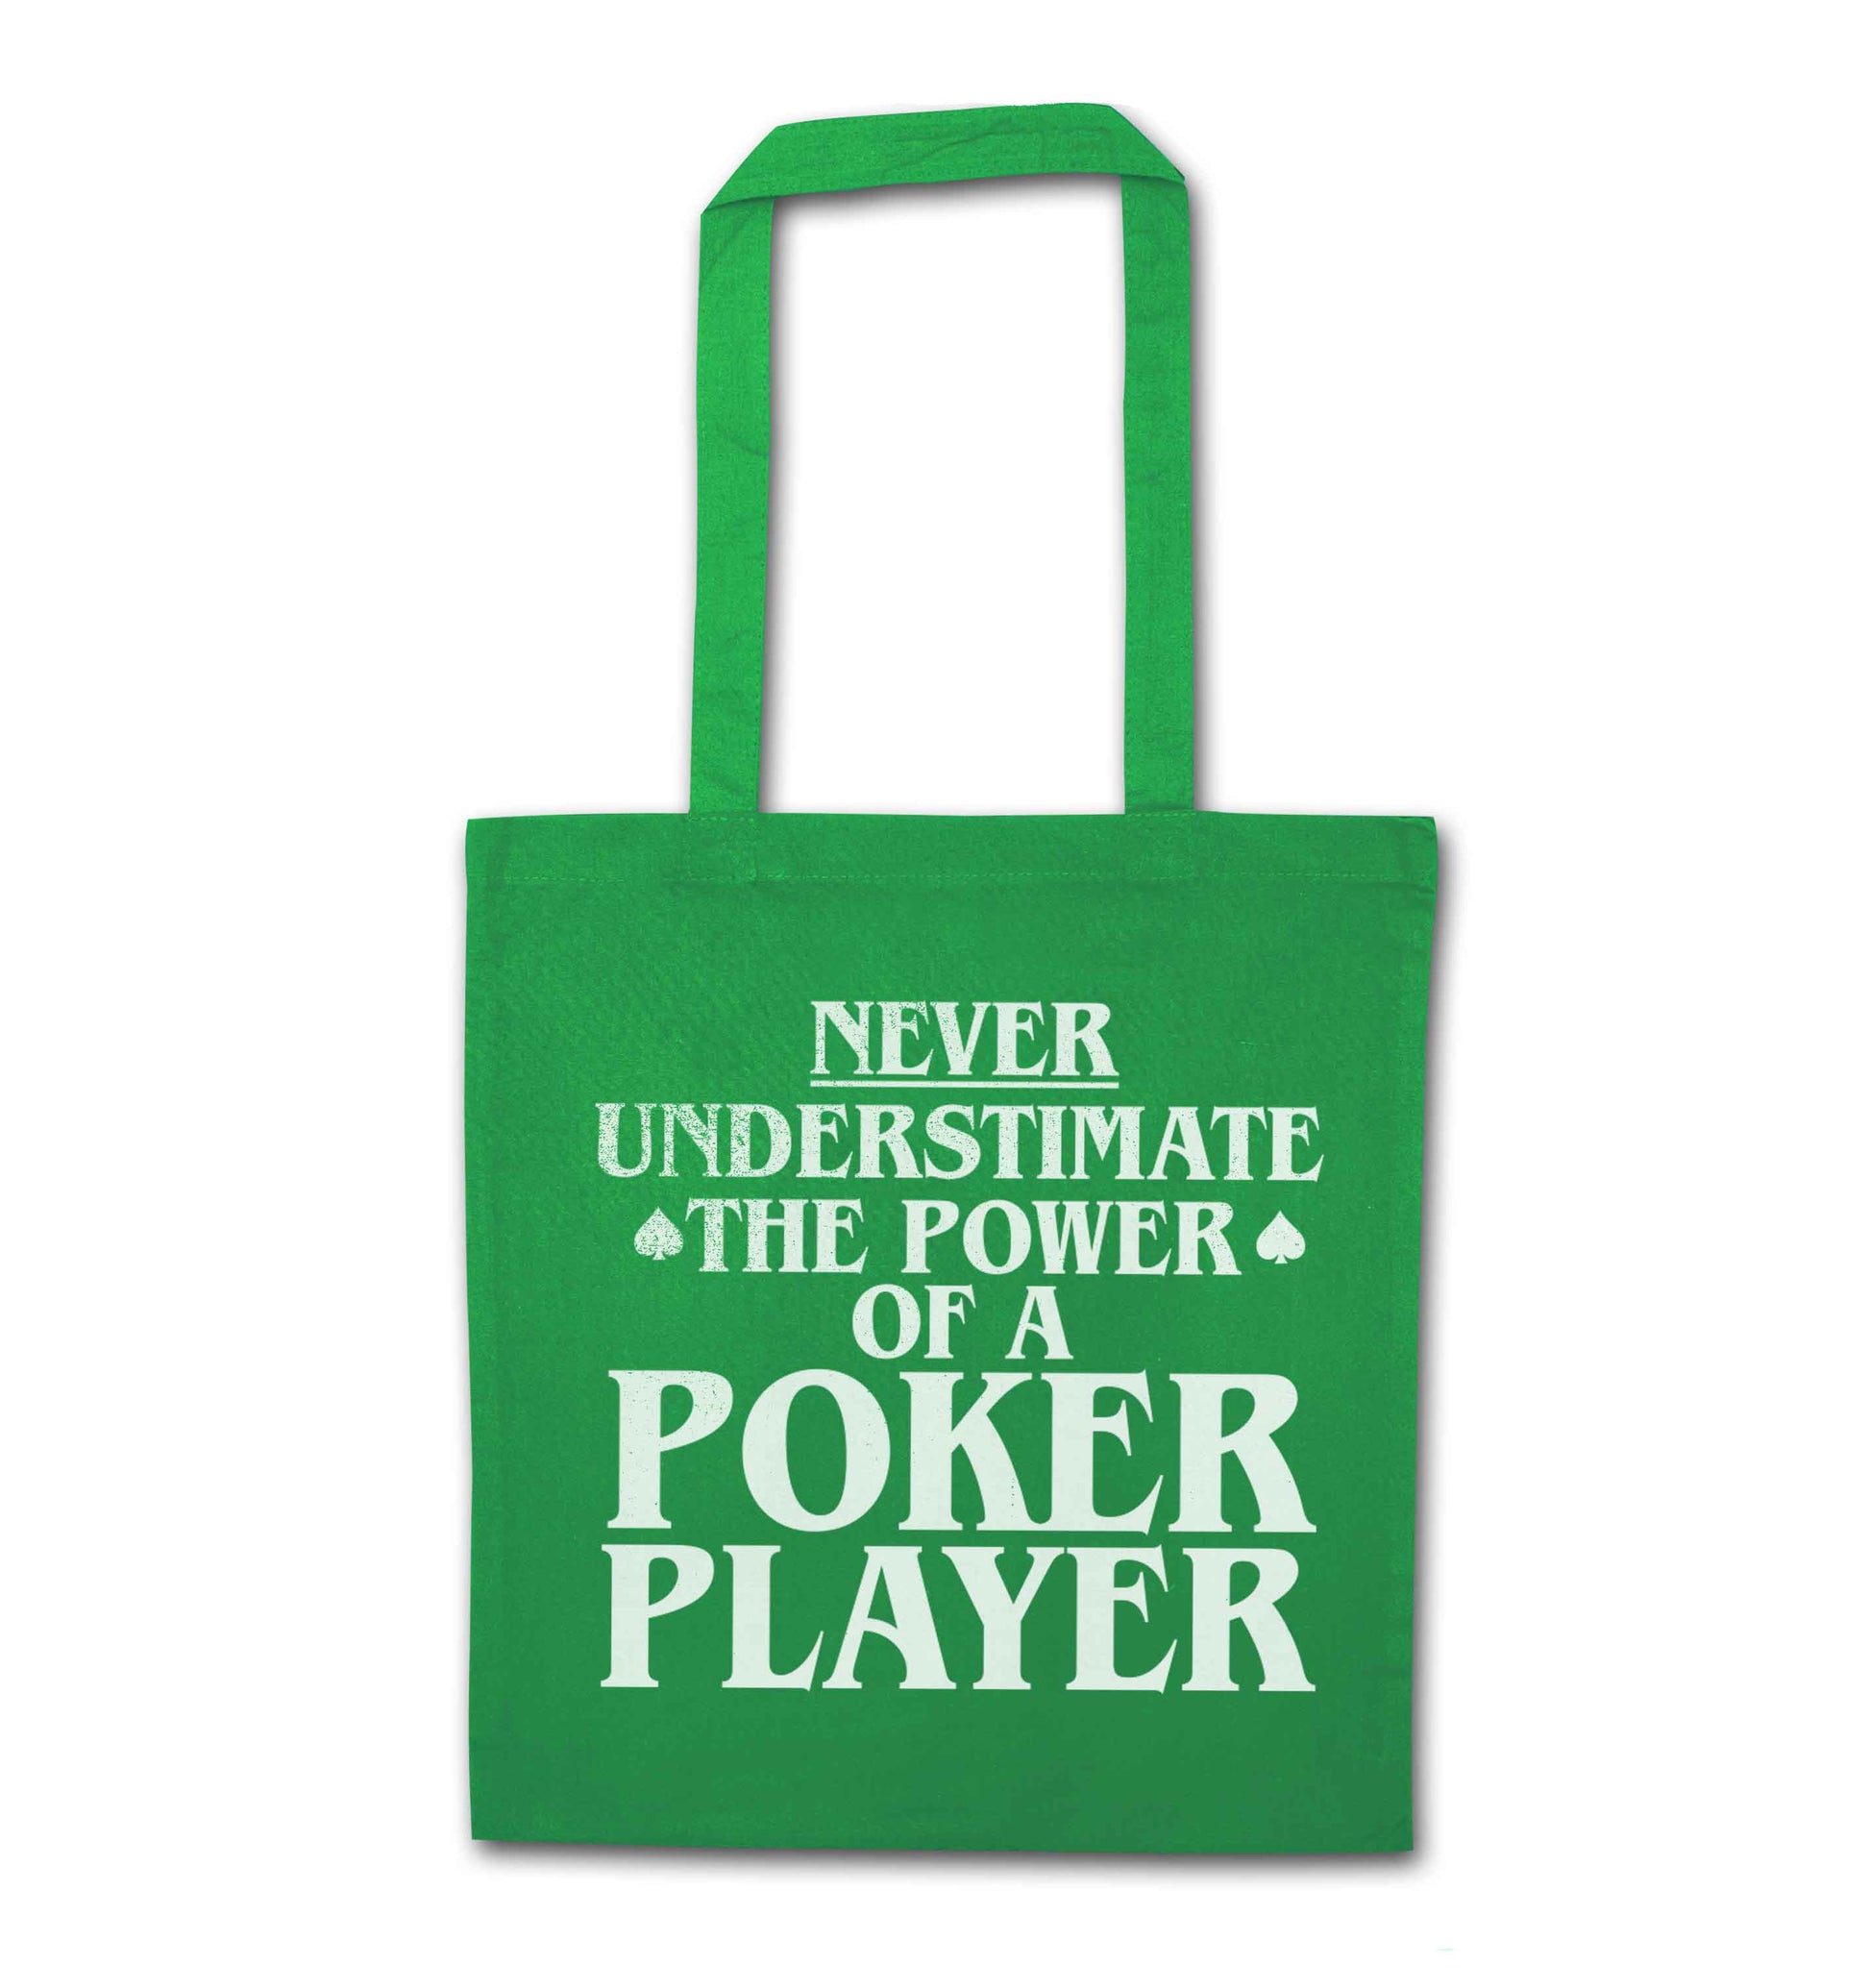 Never understimate the power of a poker player green tote bag